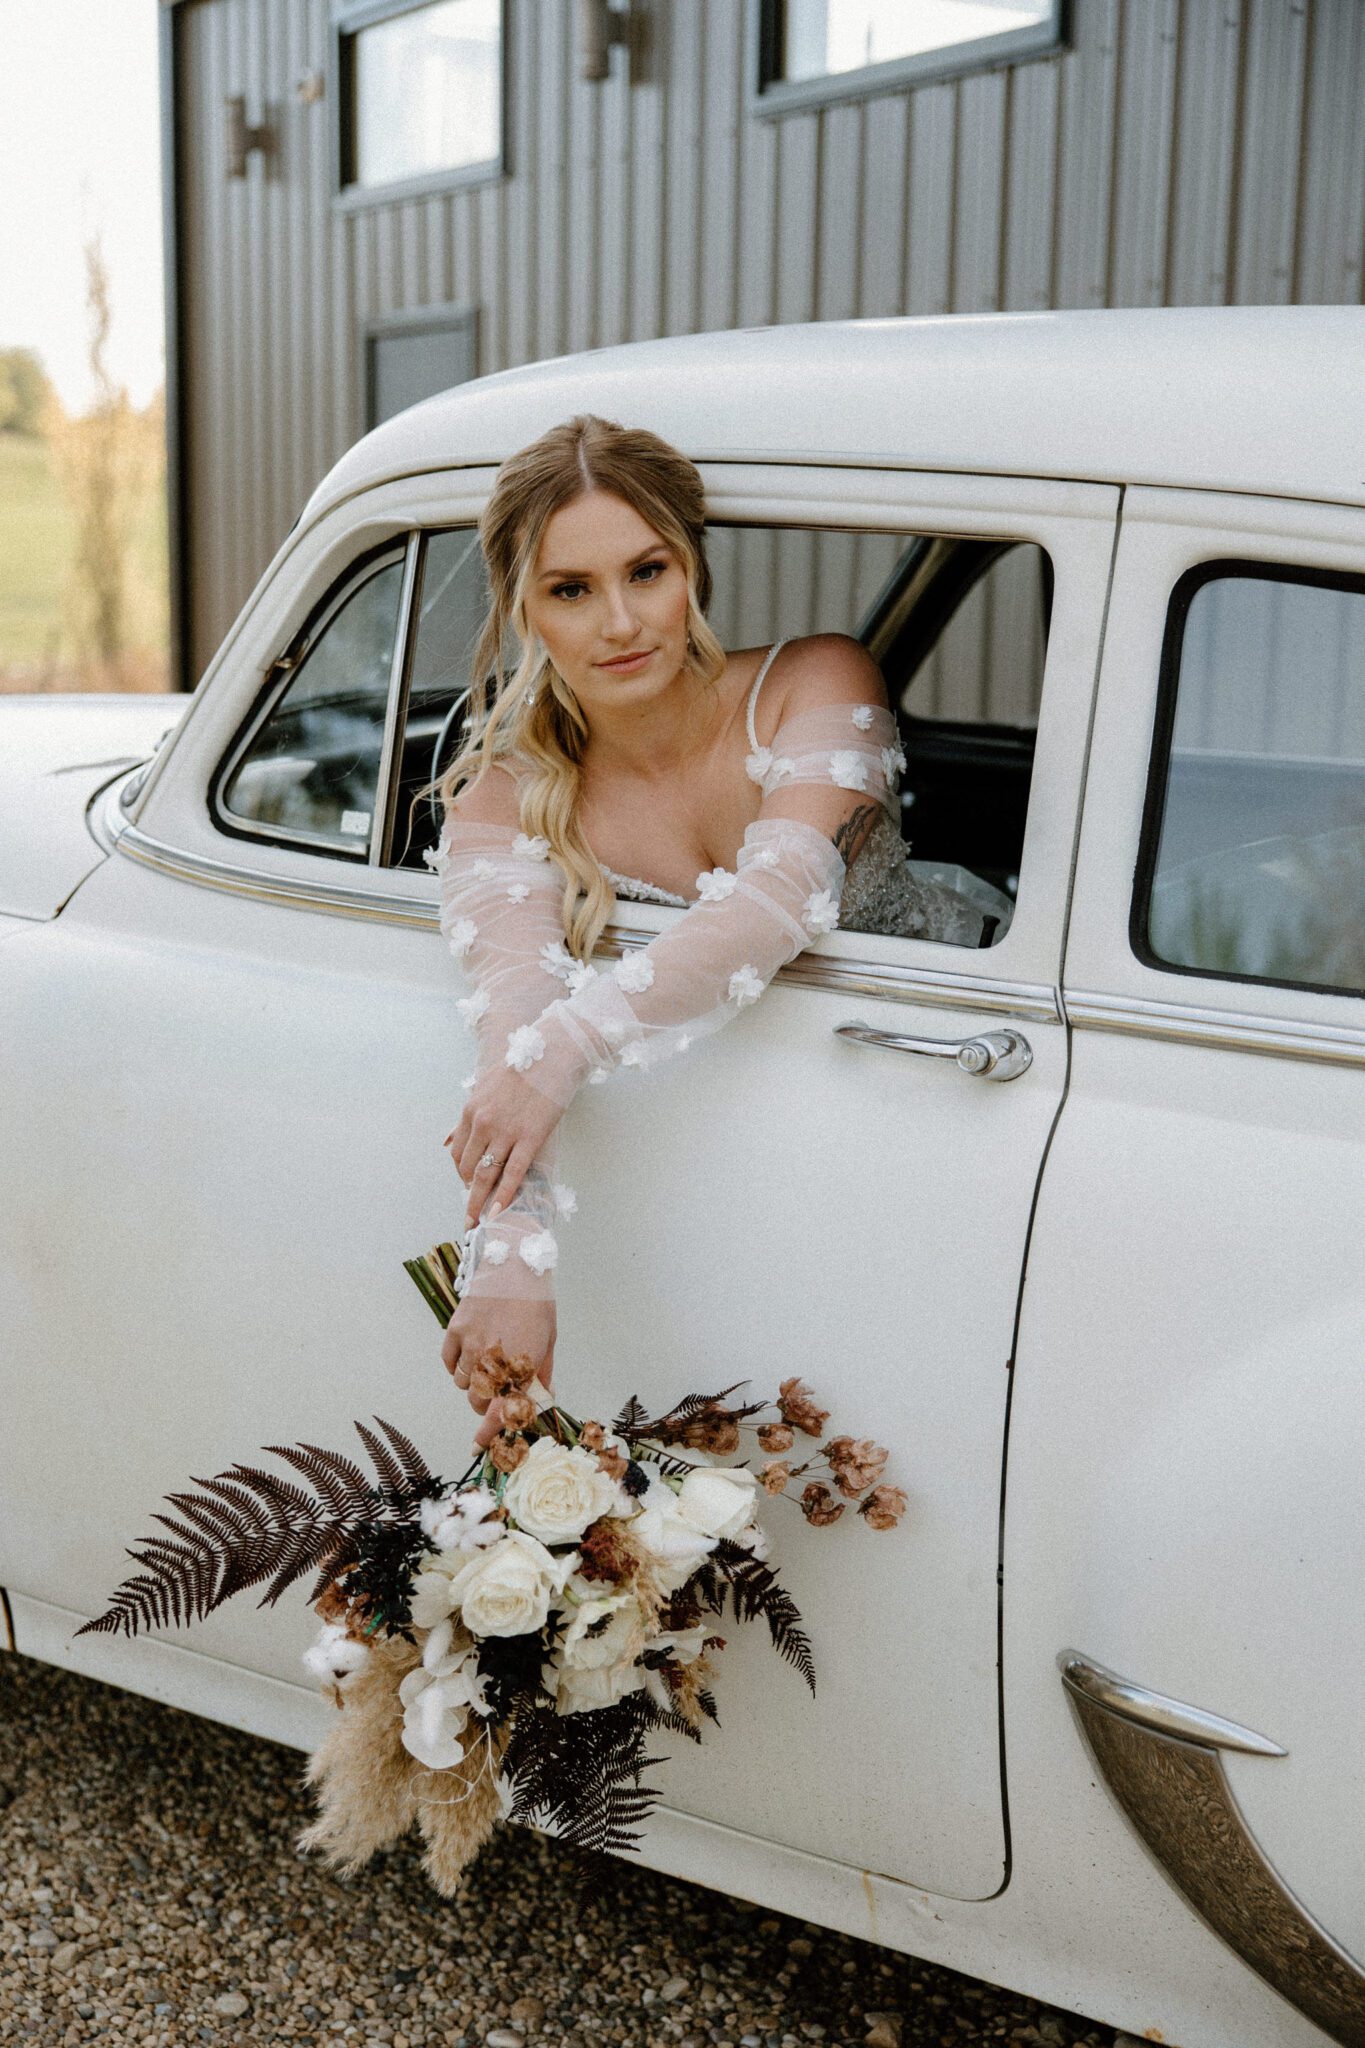 Portrait of bride sitting in the vintage getaway car at 52 North Venue, holding the bridal bouquet with rich textures and tones, wearing a floral detailed bridal gown with her hair in an elegant ponytail updo. 